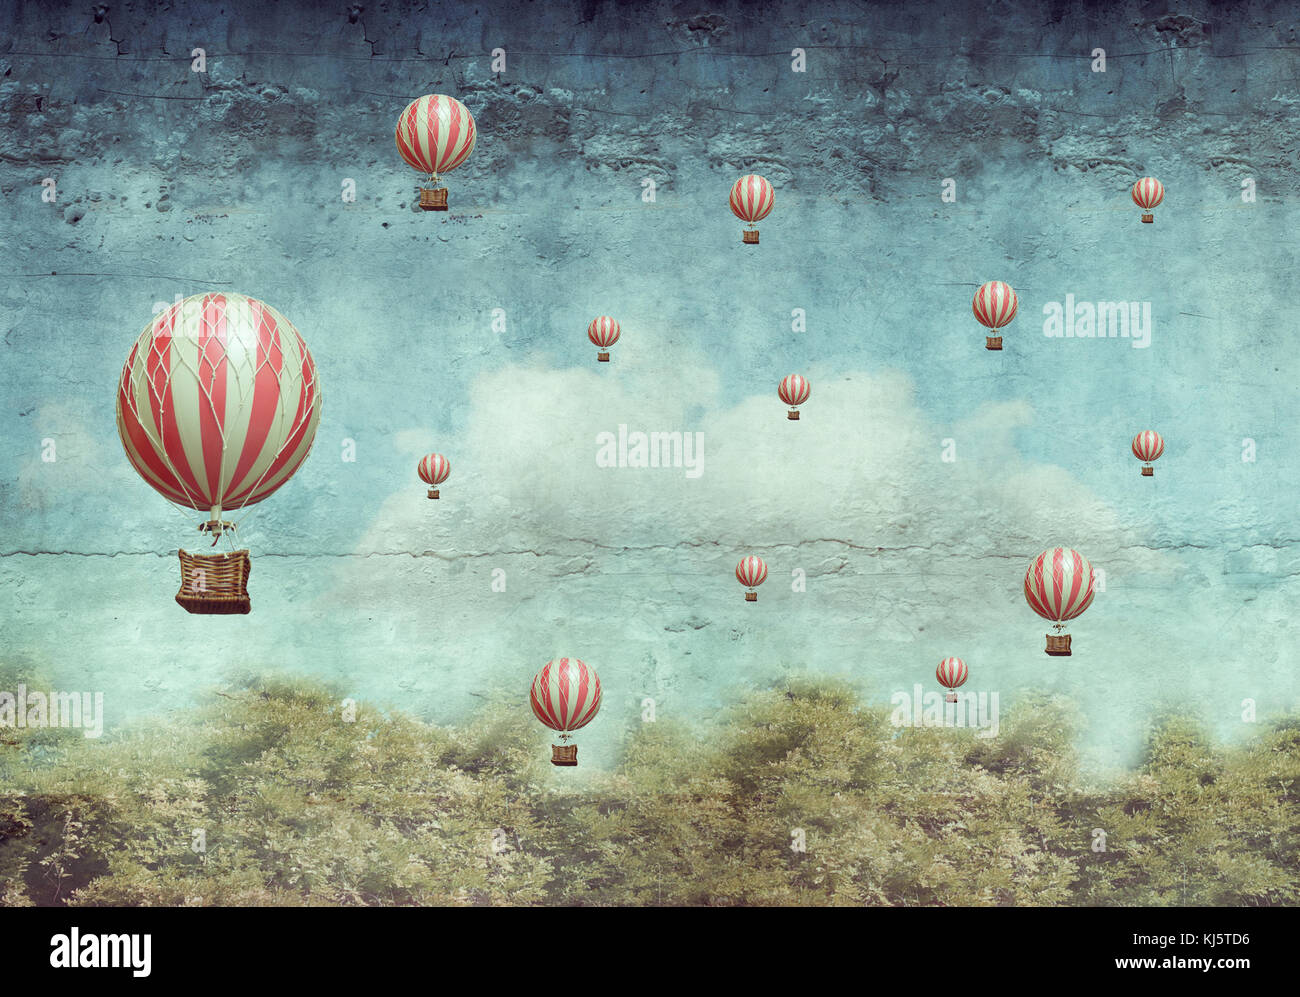 Many hot air balloons flying over a forest Stock Photo